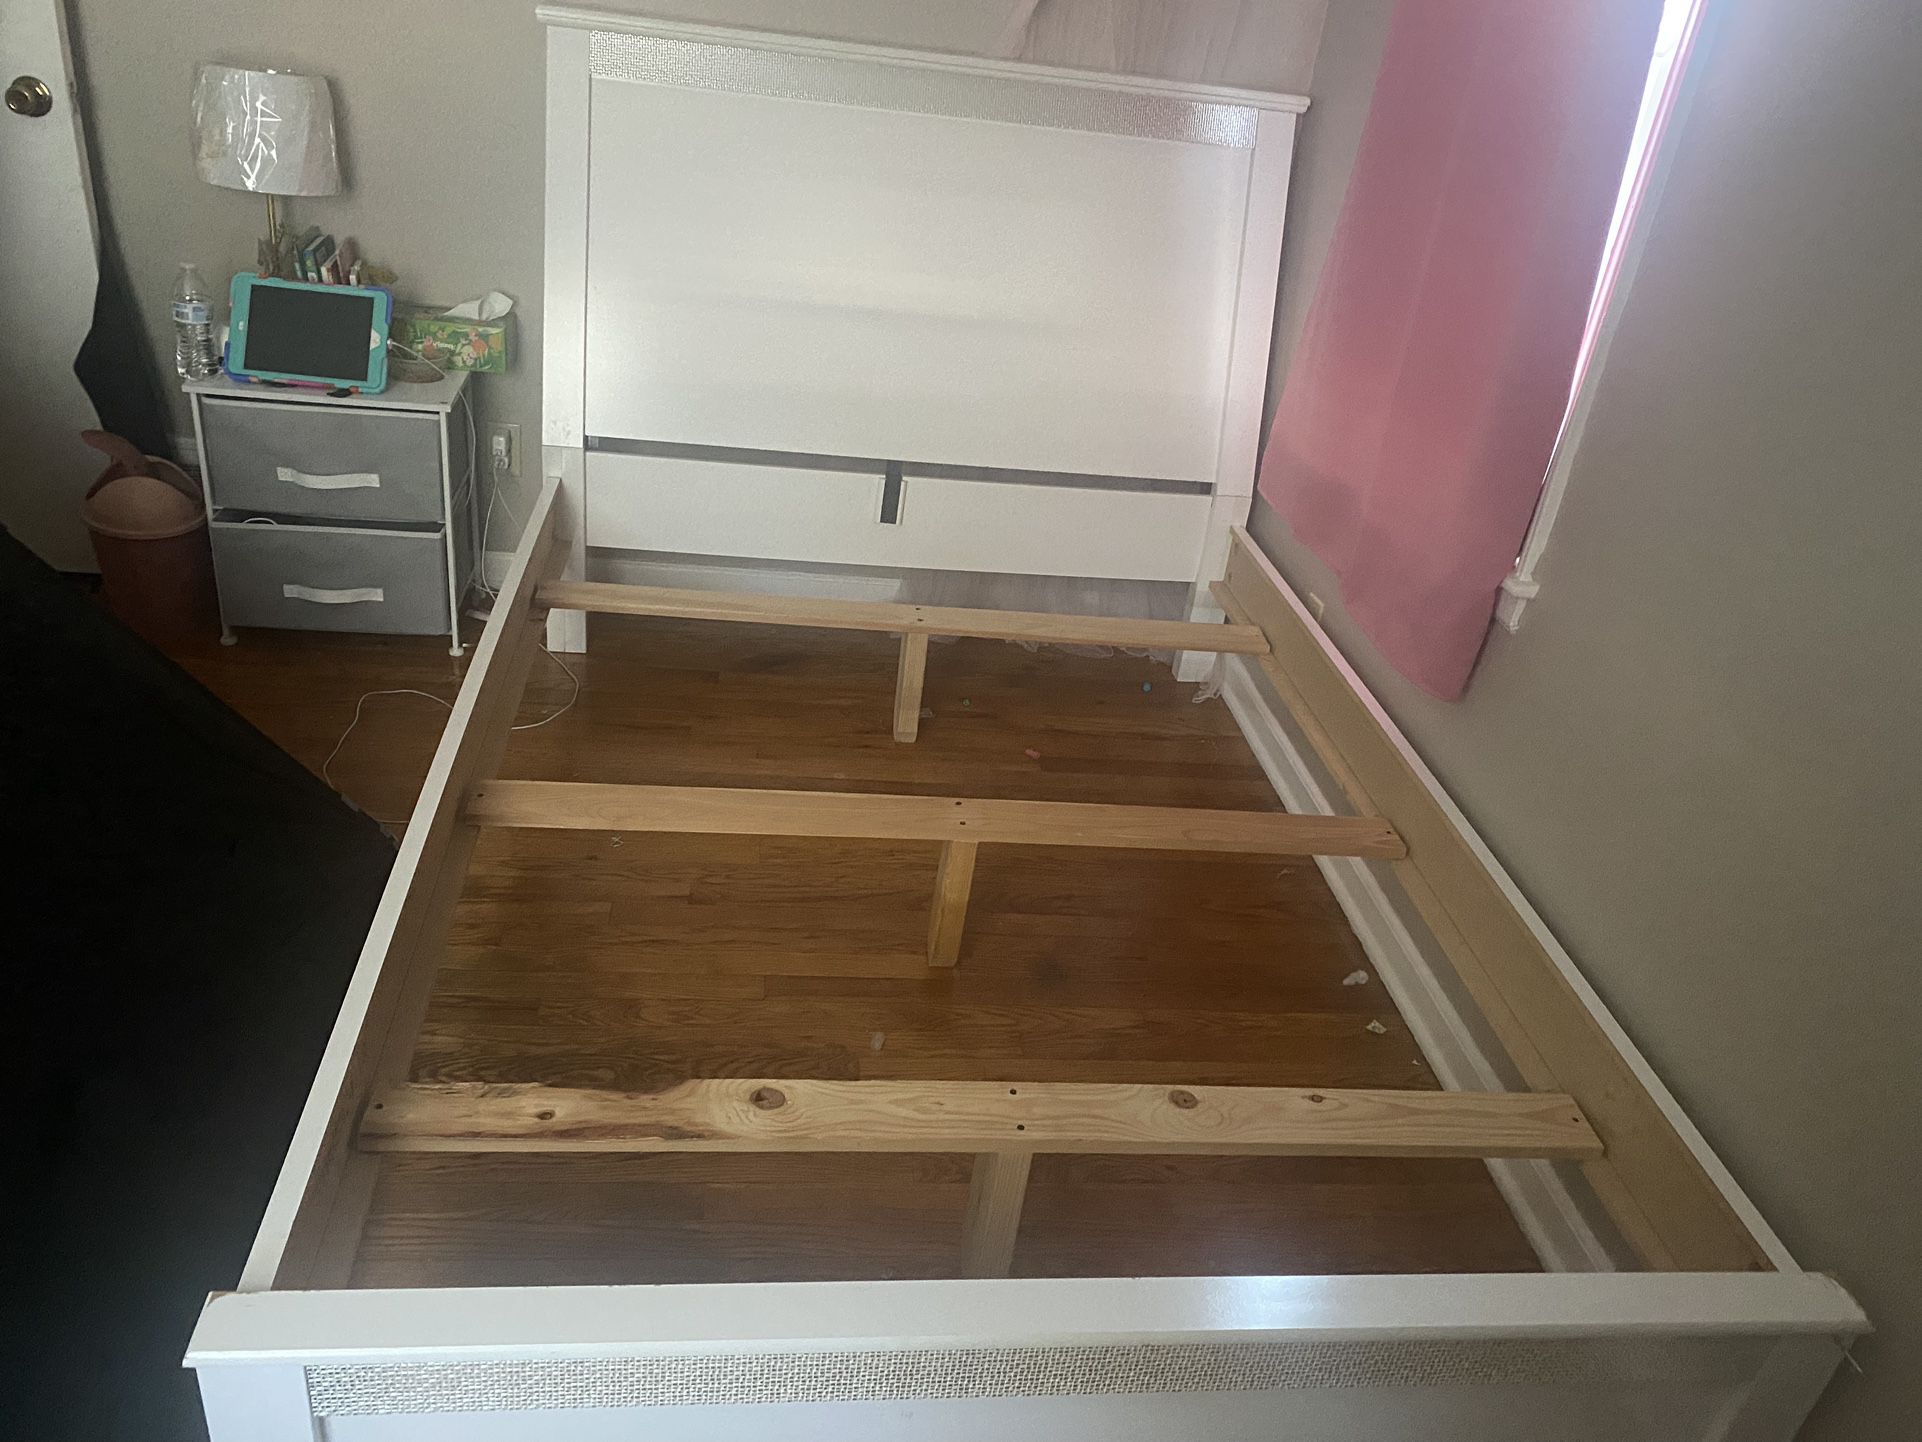 Full Size Bed With Box Spring